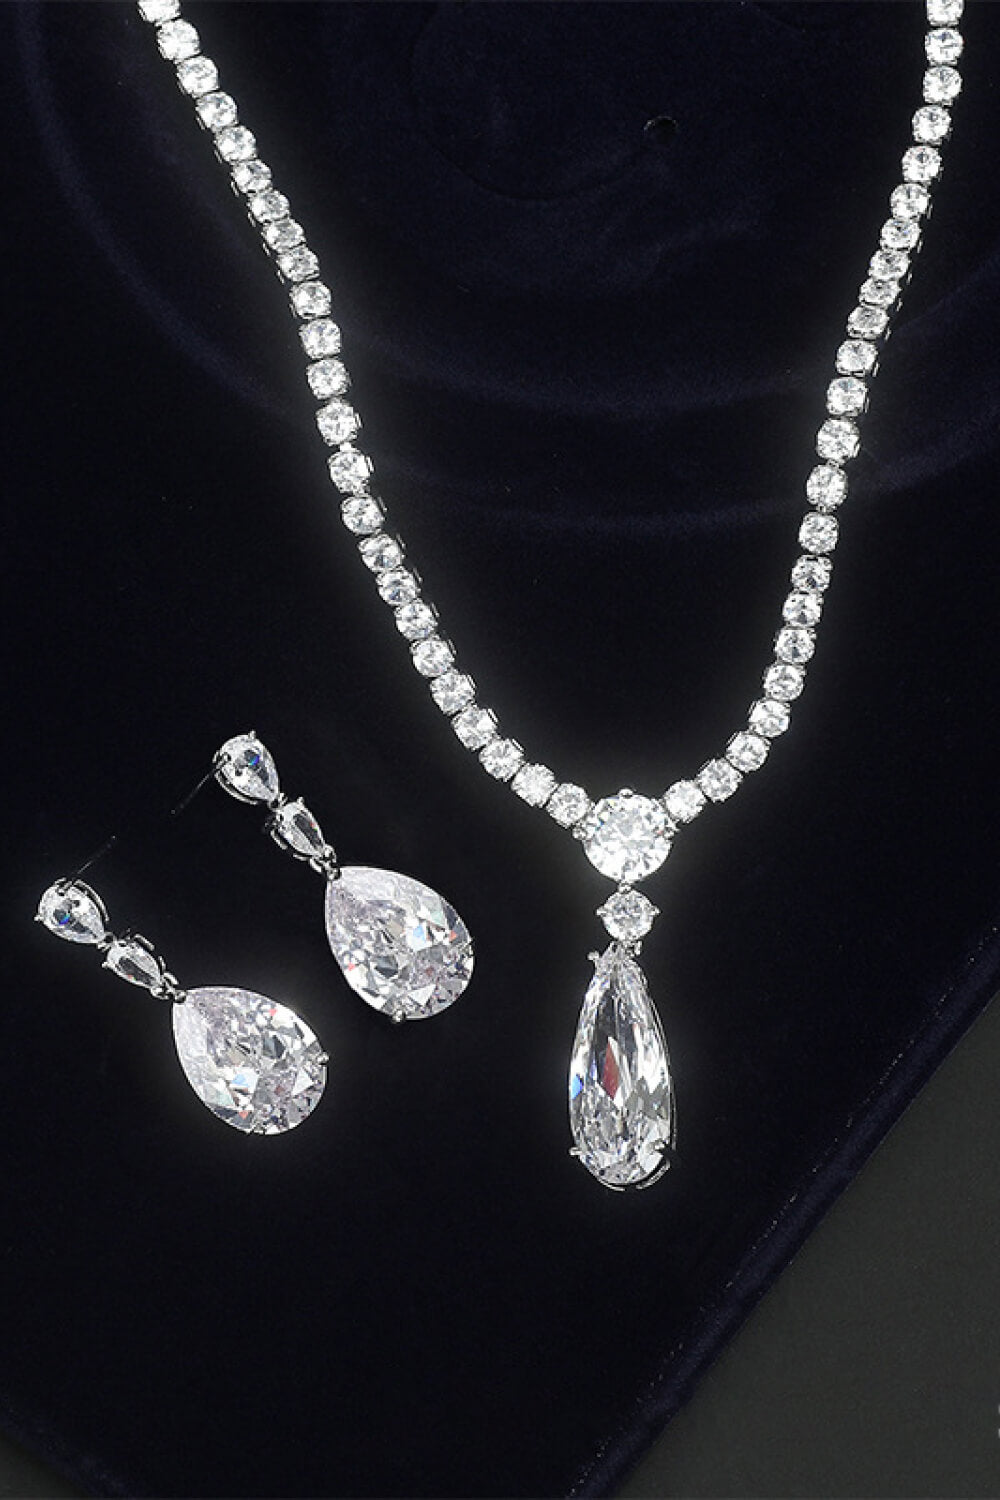 Cubic Zirconia Pendant Necklace and Earrings Set